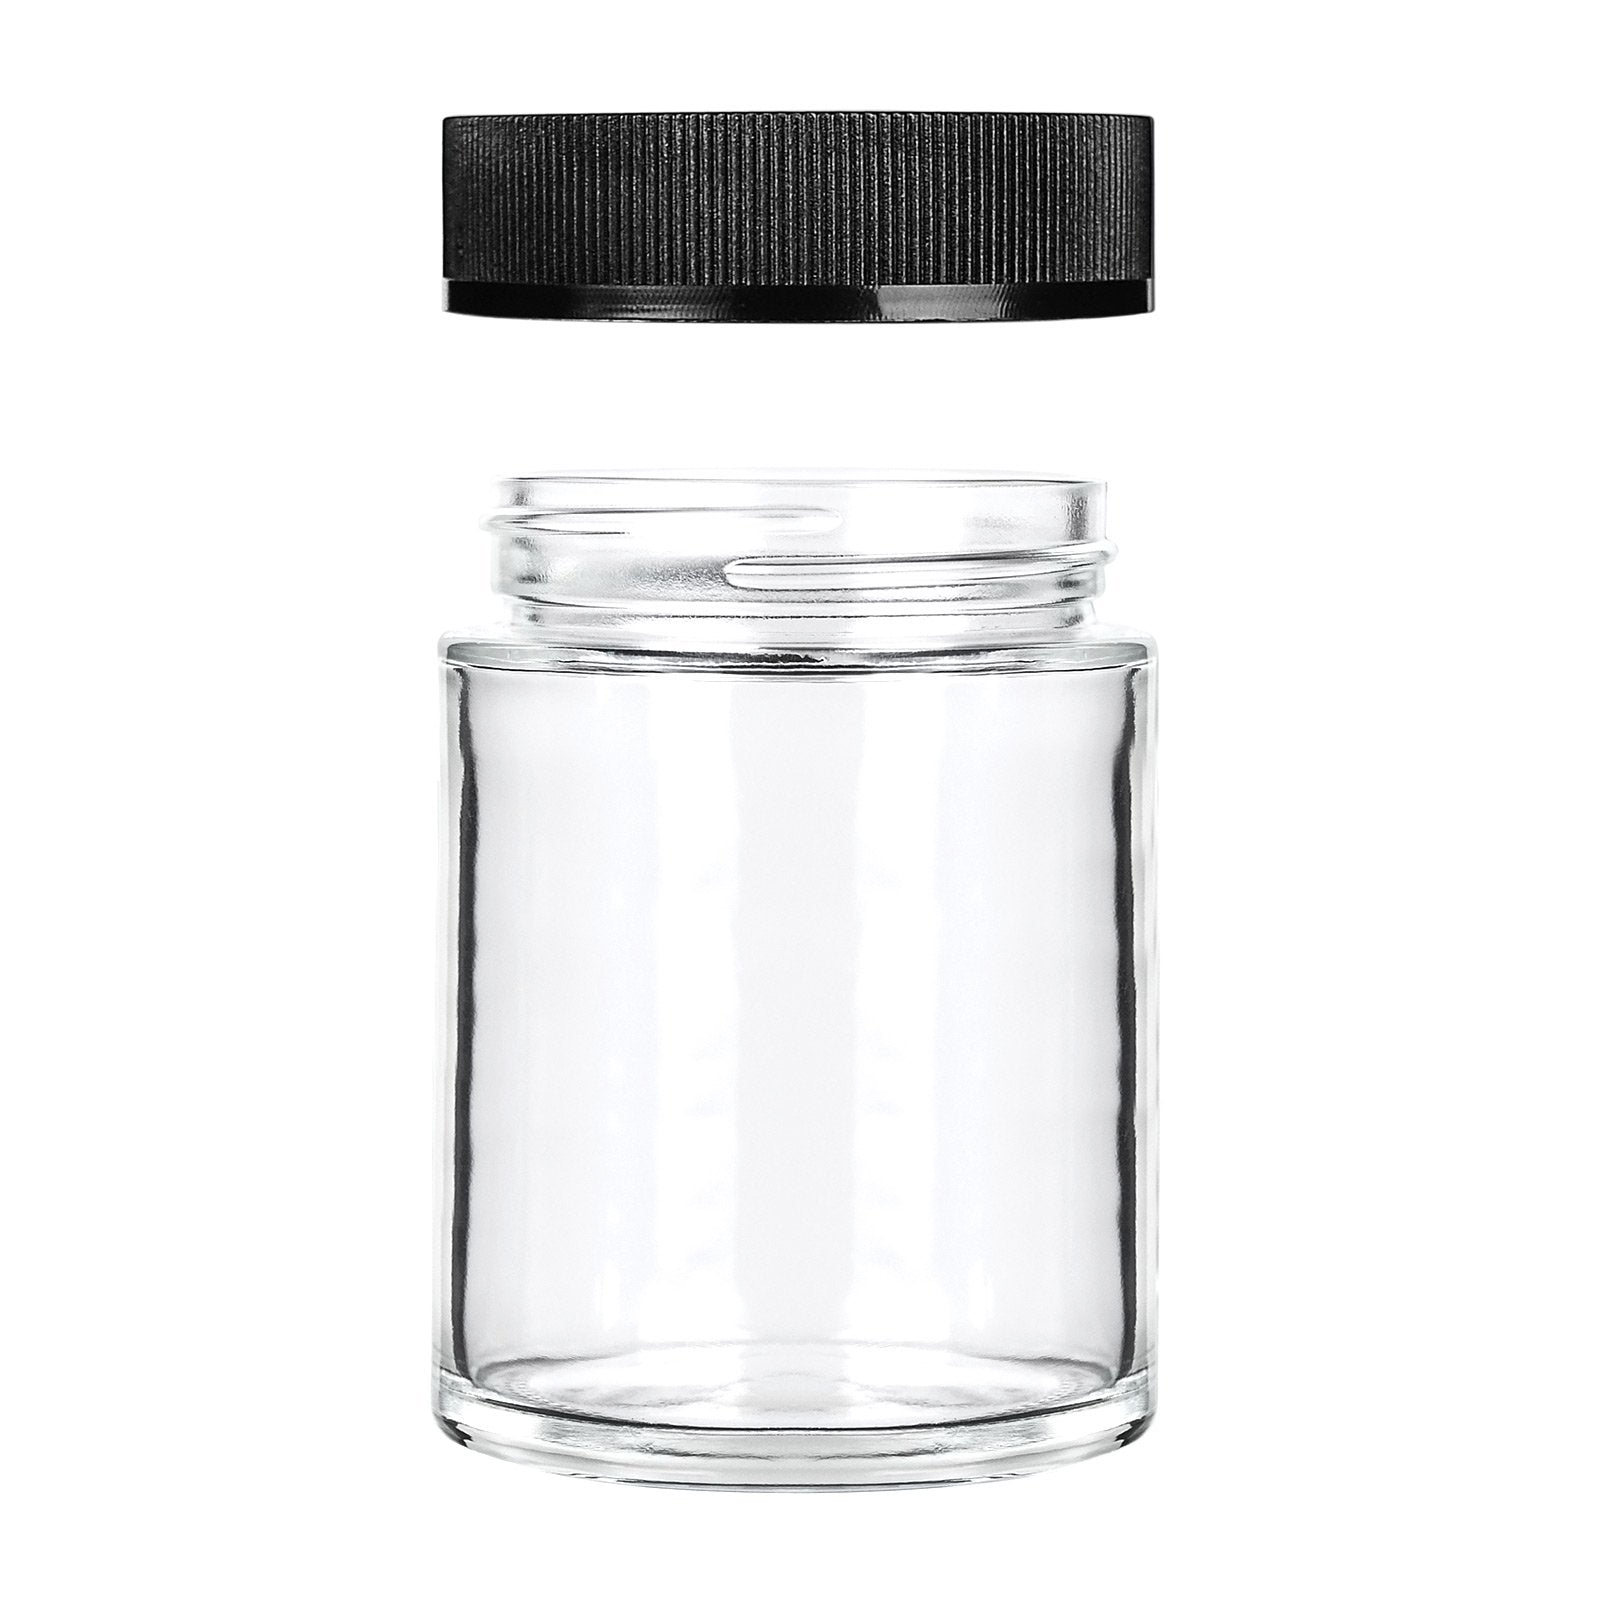 4oz Child Resistant Glass Jars with Black Caps - 7 Grams 100 Count at Flower Power Packages